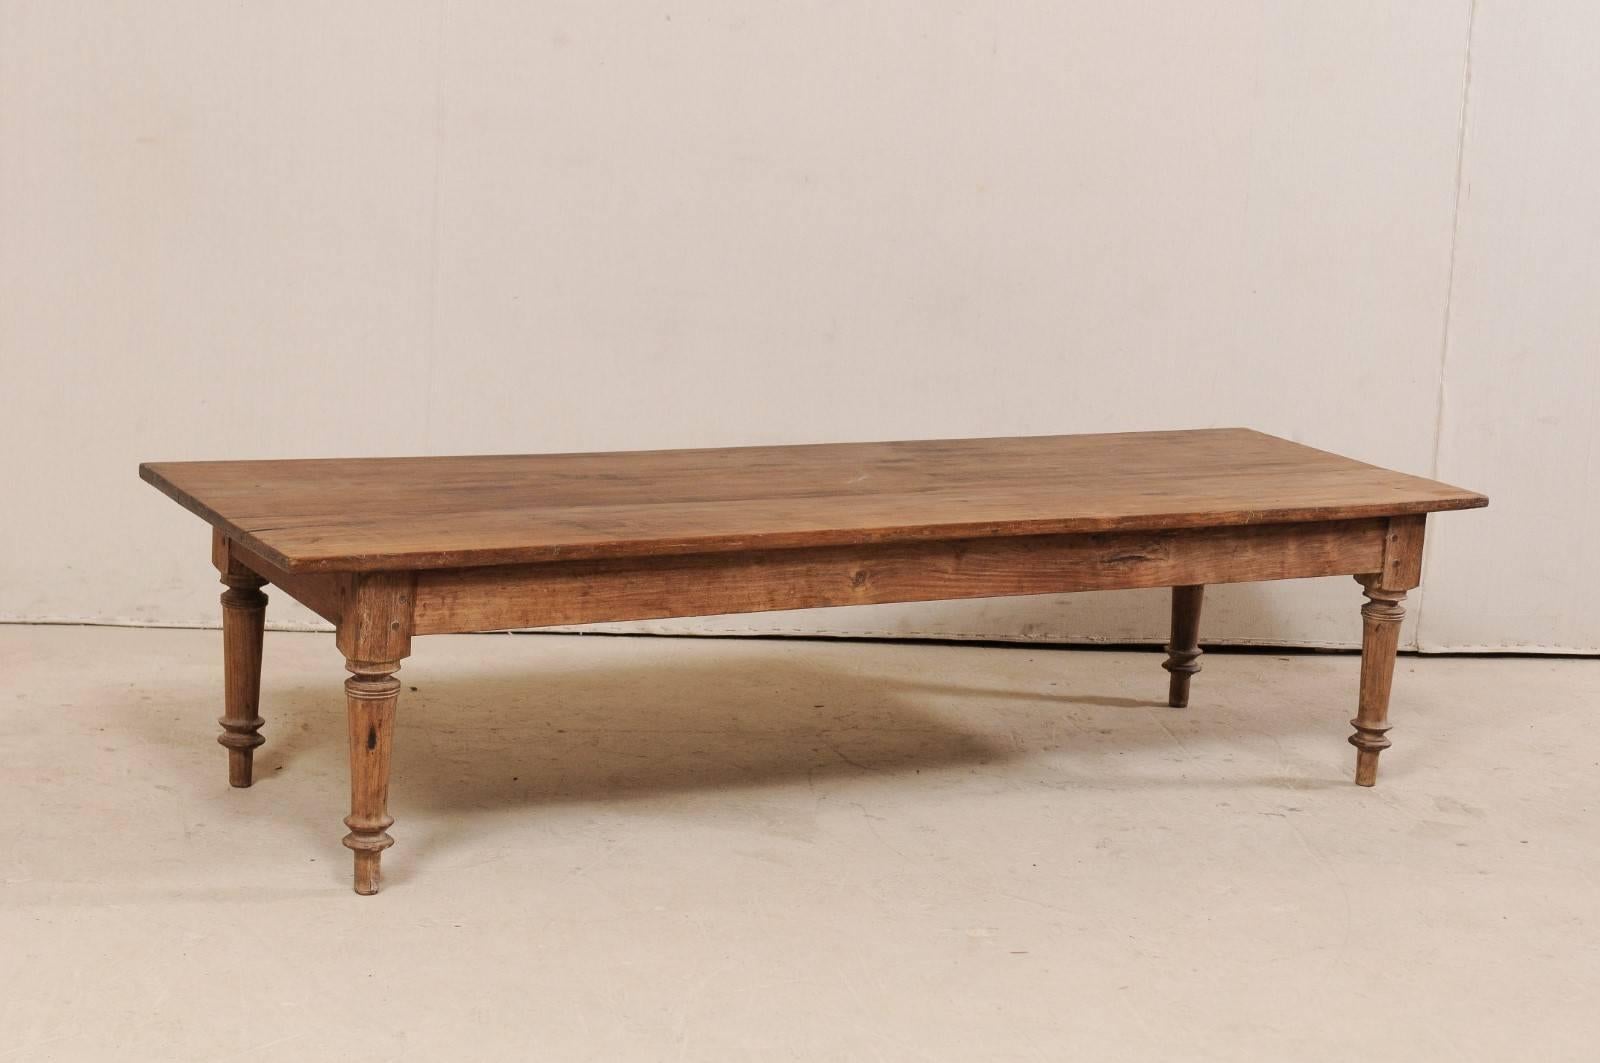 A Brazilian wooden bench (or table) from the early 20th century. This antique bench from Brazil, approximately 6.25 feet in length, has been constructed of a tropical hardwood and features a long, rectangular-shaped top, plain skirt, and supported